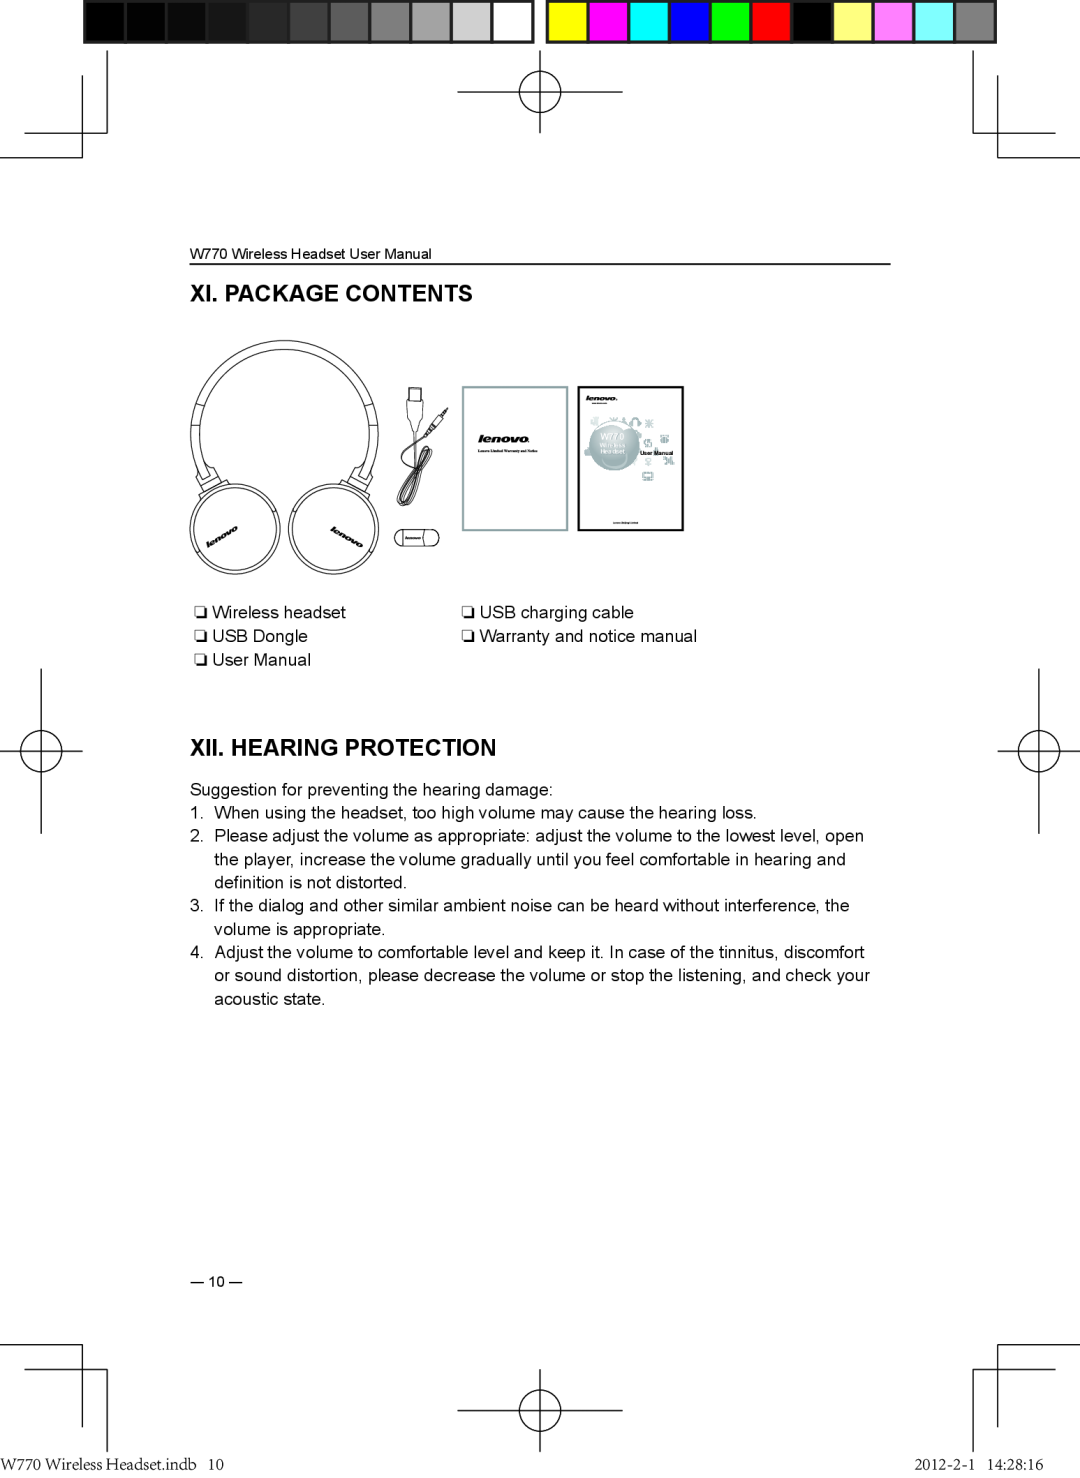 Lenovo W770 user manual XI. Package contents, XII. Hearing protection, Wireless headset, USB charging cable, USB Dongle 